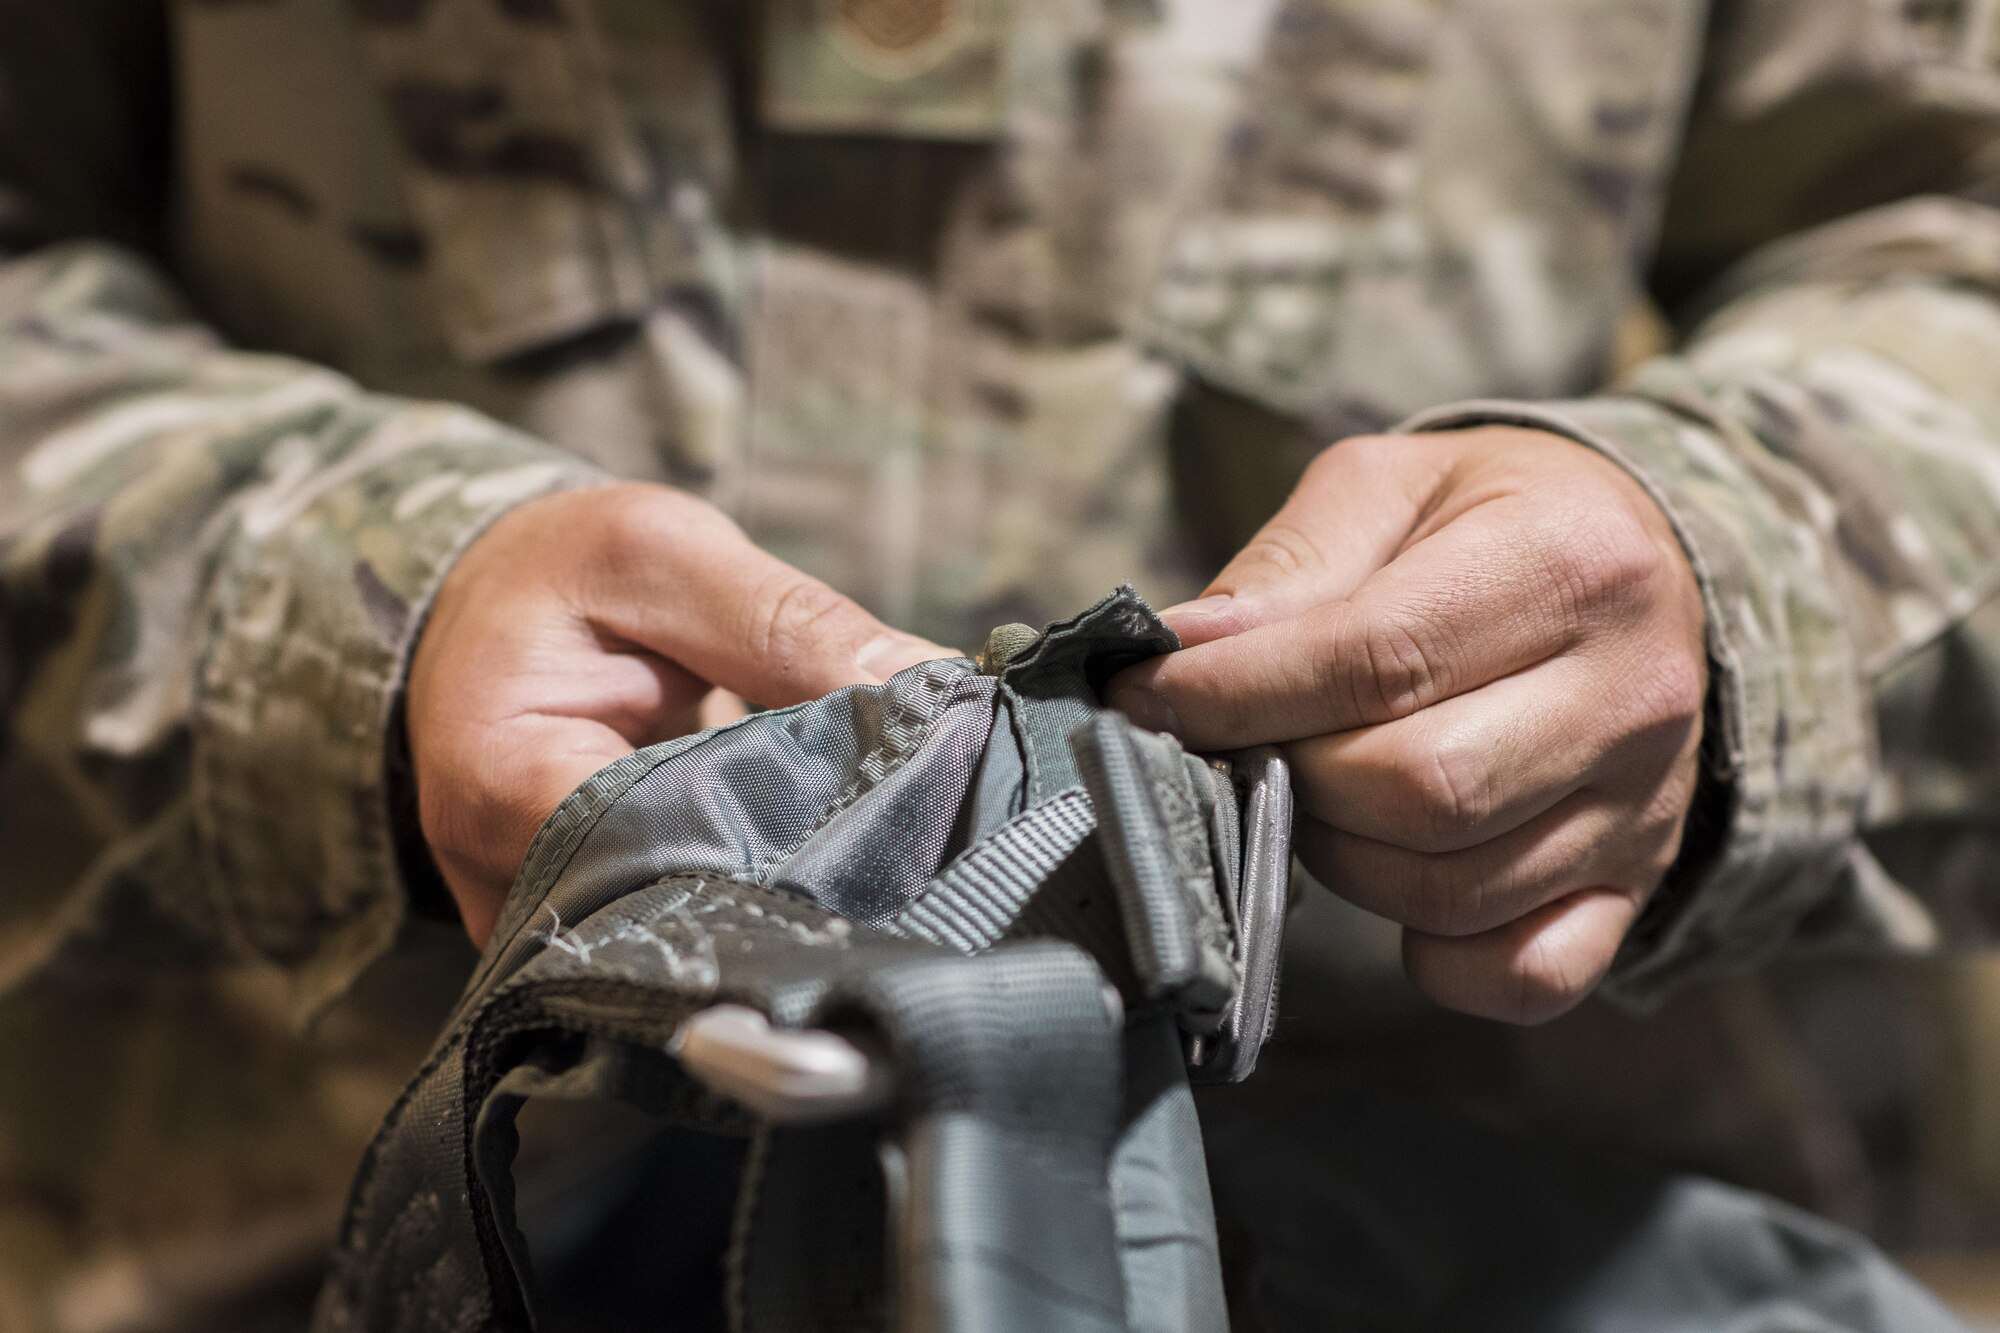 Tech. Sgt. Todd Huerta, 332nd Aircrew Flight Equipment non-commissioned officer in charge, inspects a harness June 12, 2017, in Southwest Asia. With the amount of hours spent flying, a pilot’s equipment is susceptible to wear and tear and must be routinely inspected. (U.S. Air Force photo/Senior Airman Damon Kasberg)